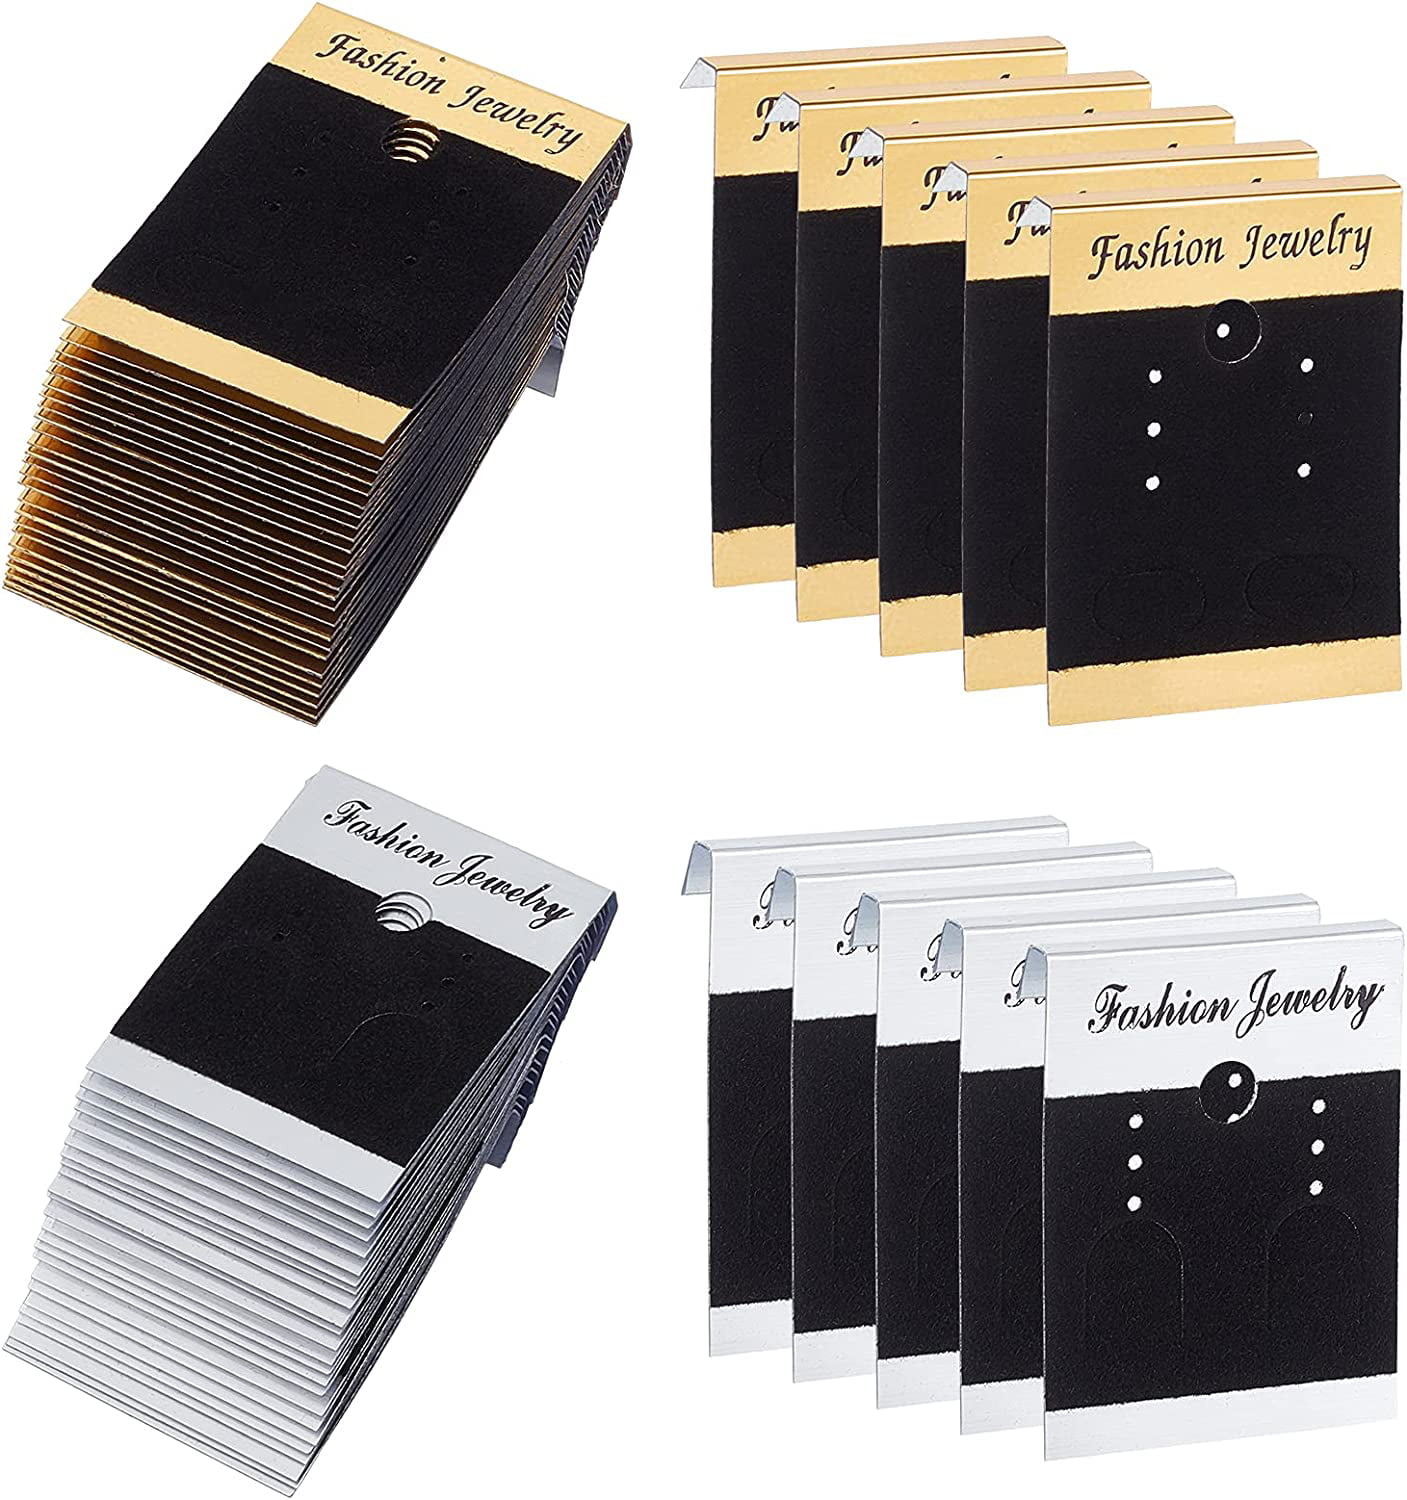 Genie Crafts Earring Cards - 100-Pack Earring Card Holder, Velvet Hanging Jewelry  Display Cards for Earrings, Ear Studs, Black, 2 x 2 Inches 